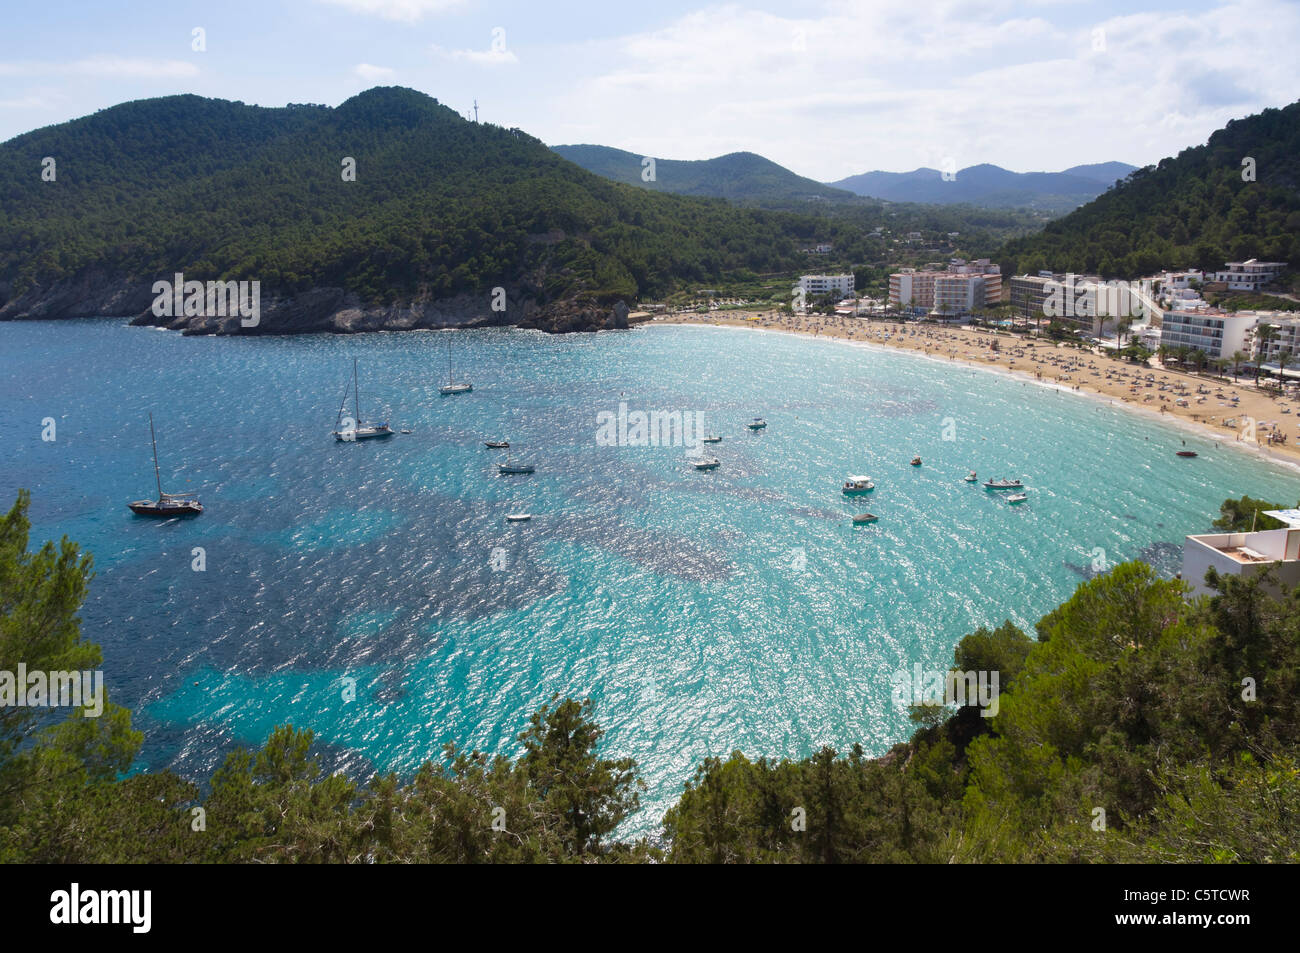 Ibiza, Balearics, Spain - Cala de San Vincente or Sant Vincent, bay with beach and hotels Stock Photo